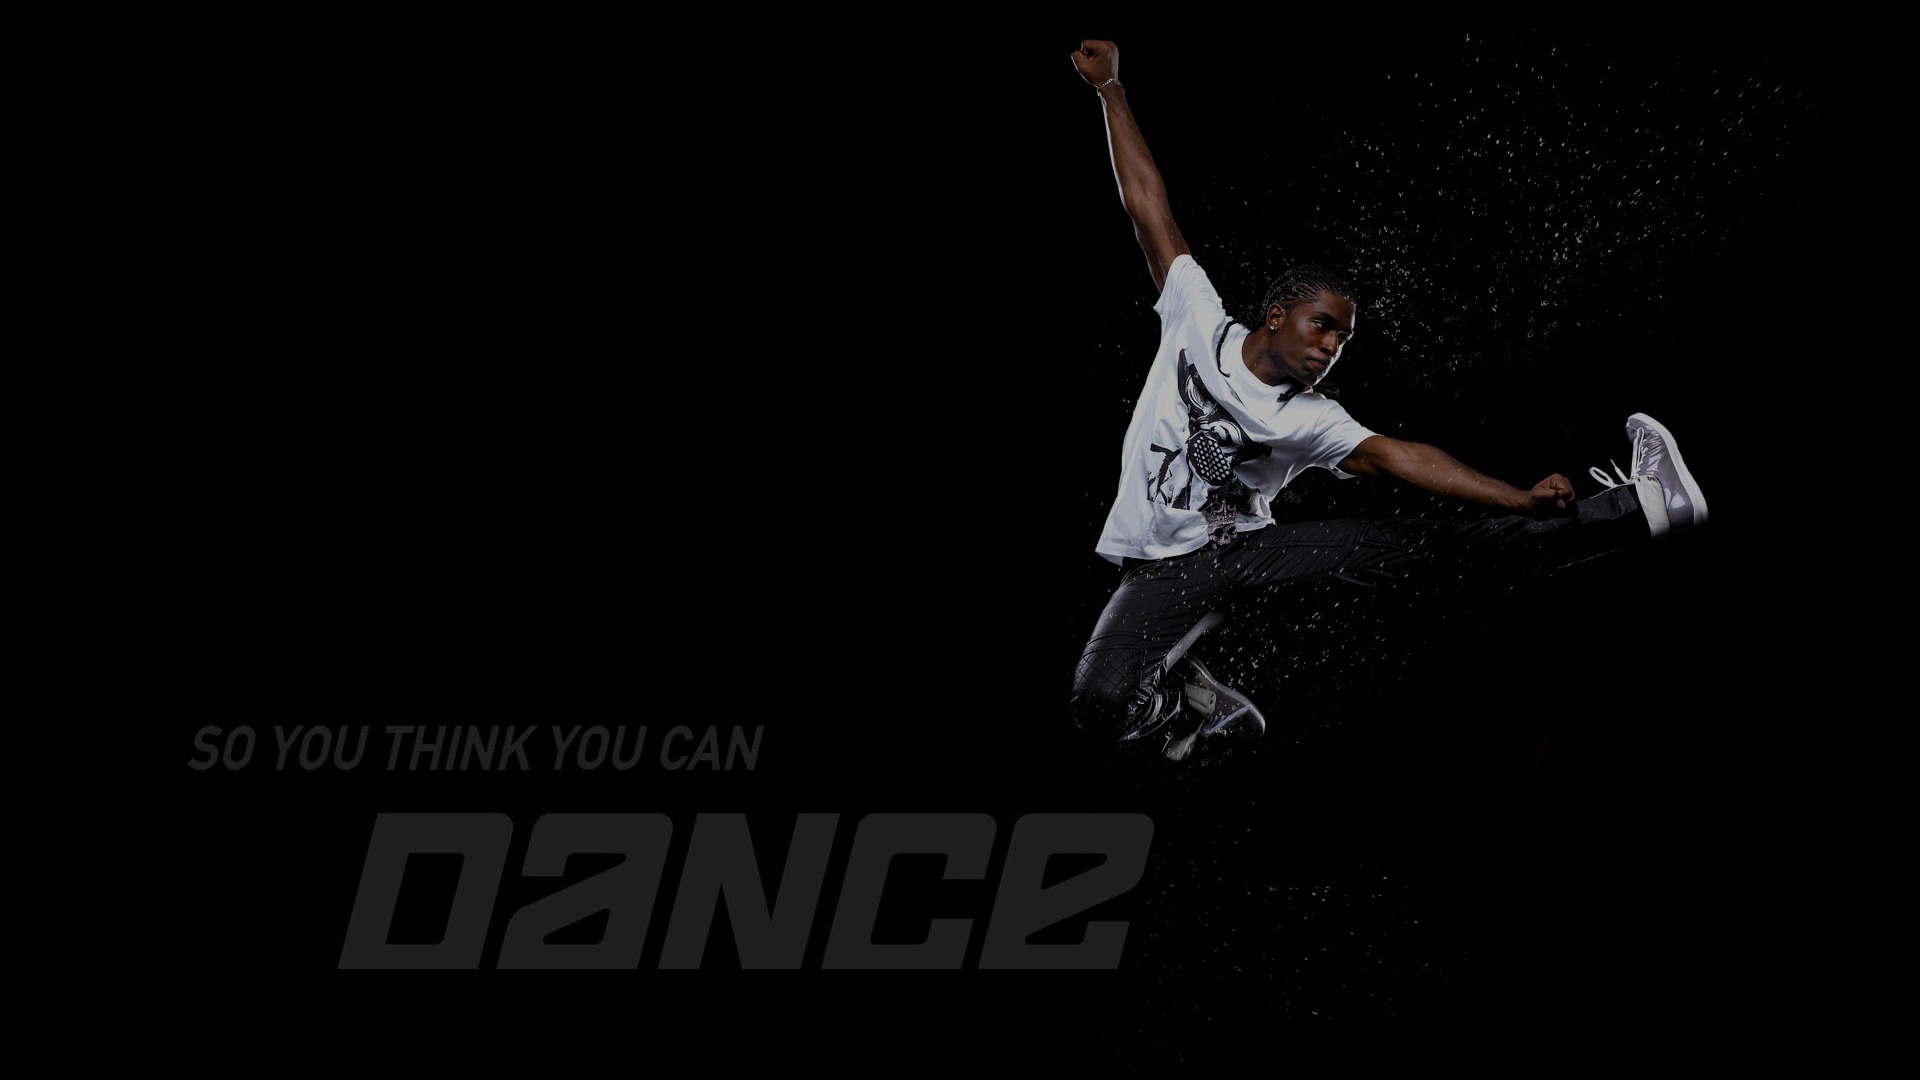 So You Think You Can Dance wallpaper (2) #4 - 1920x1080